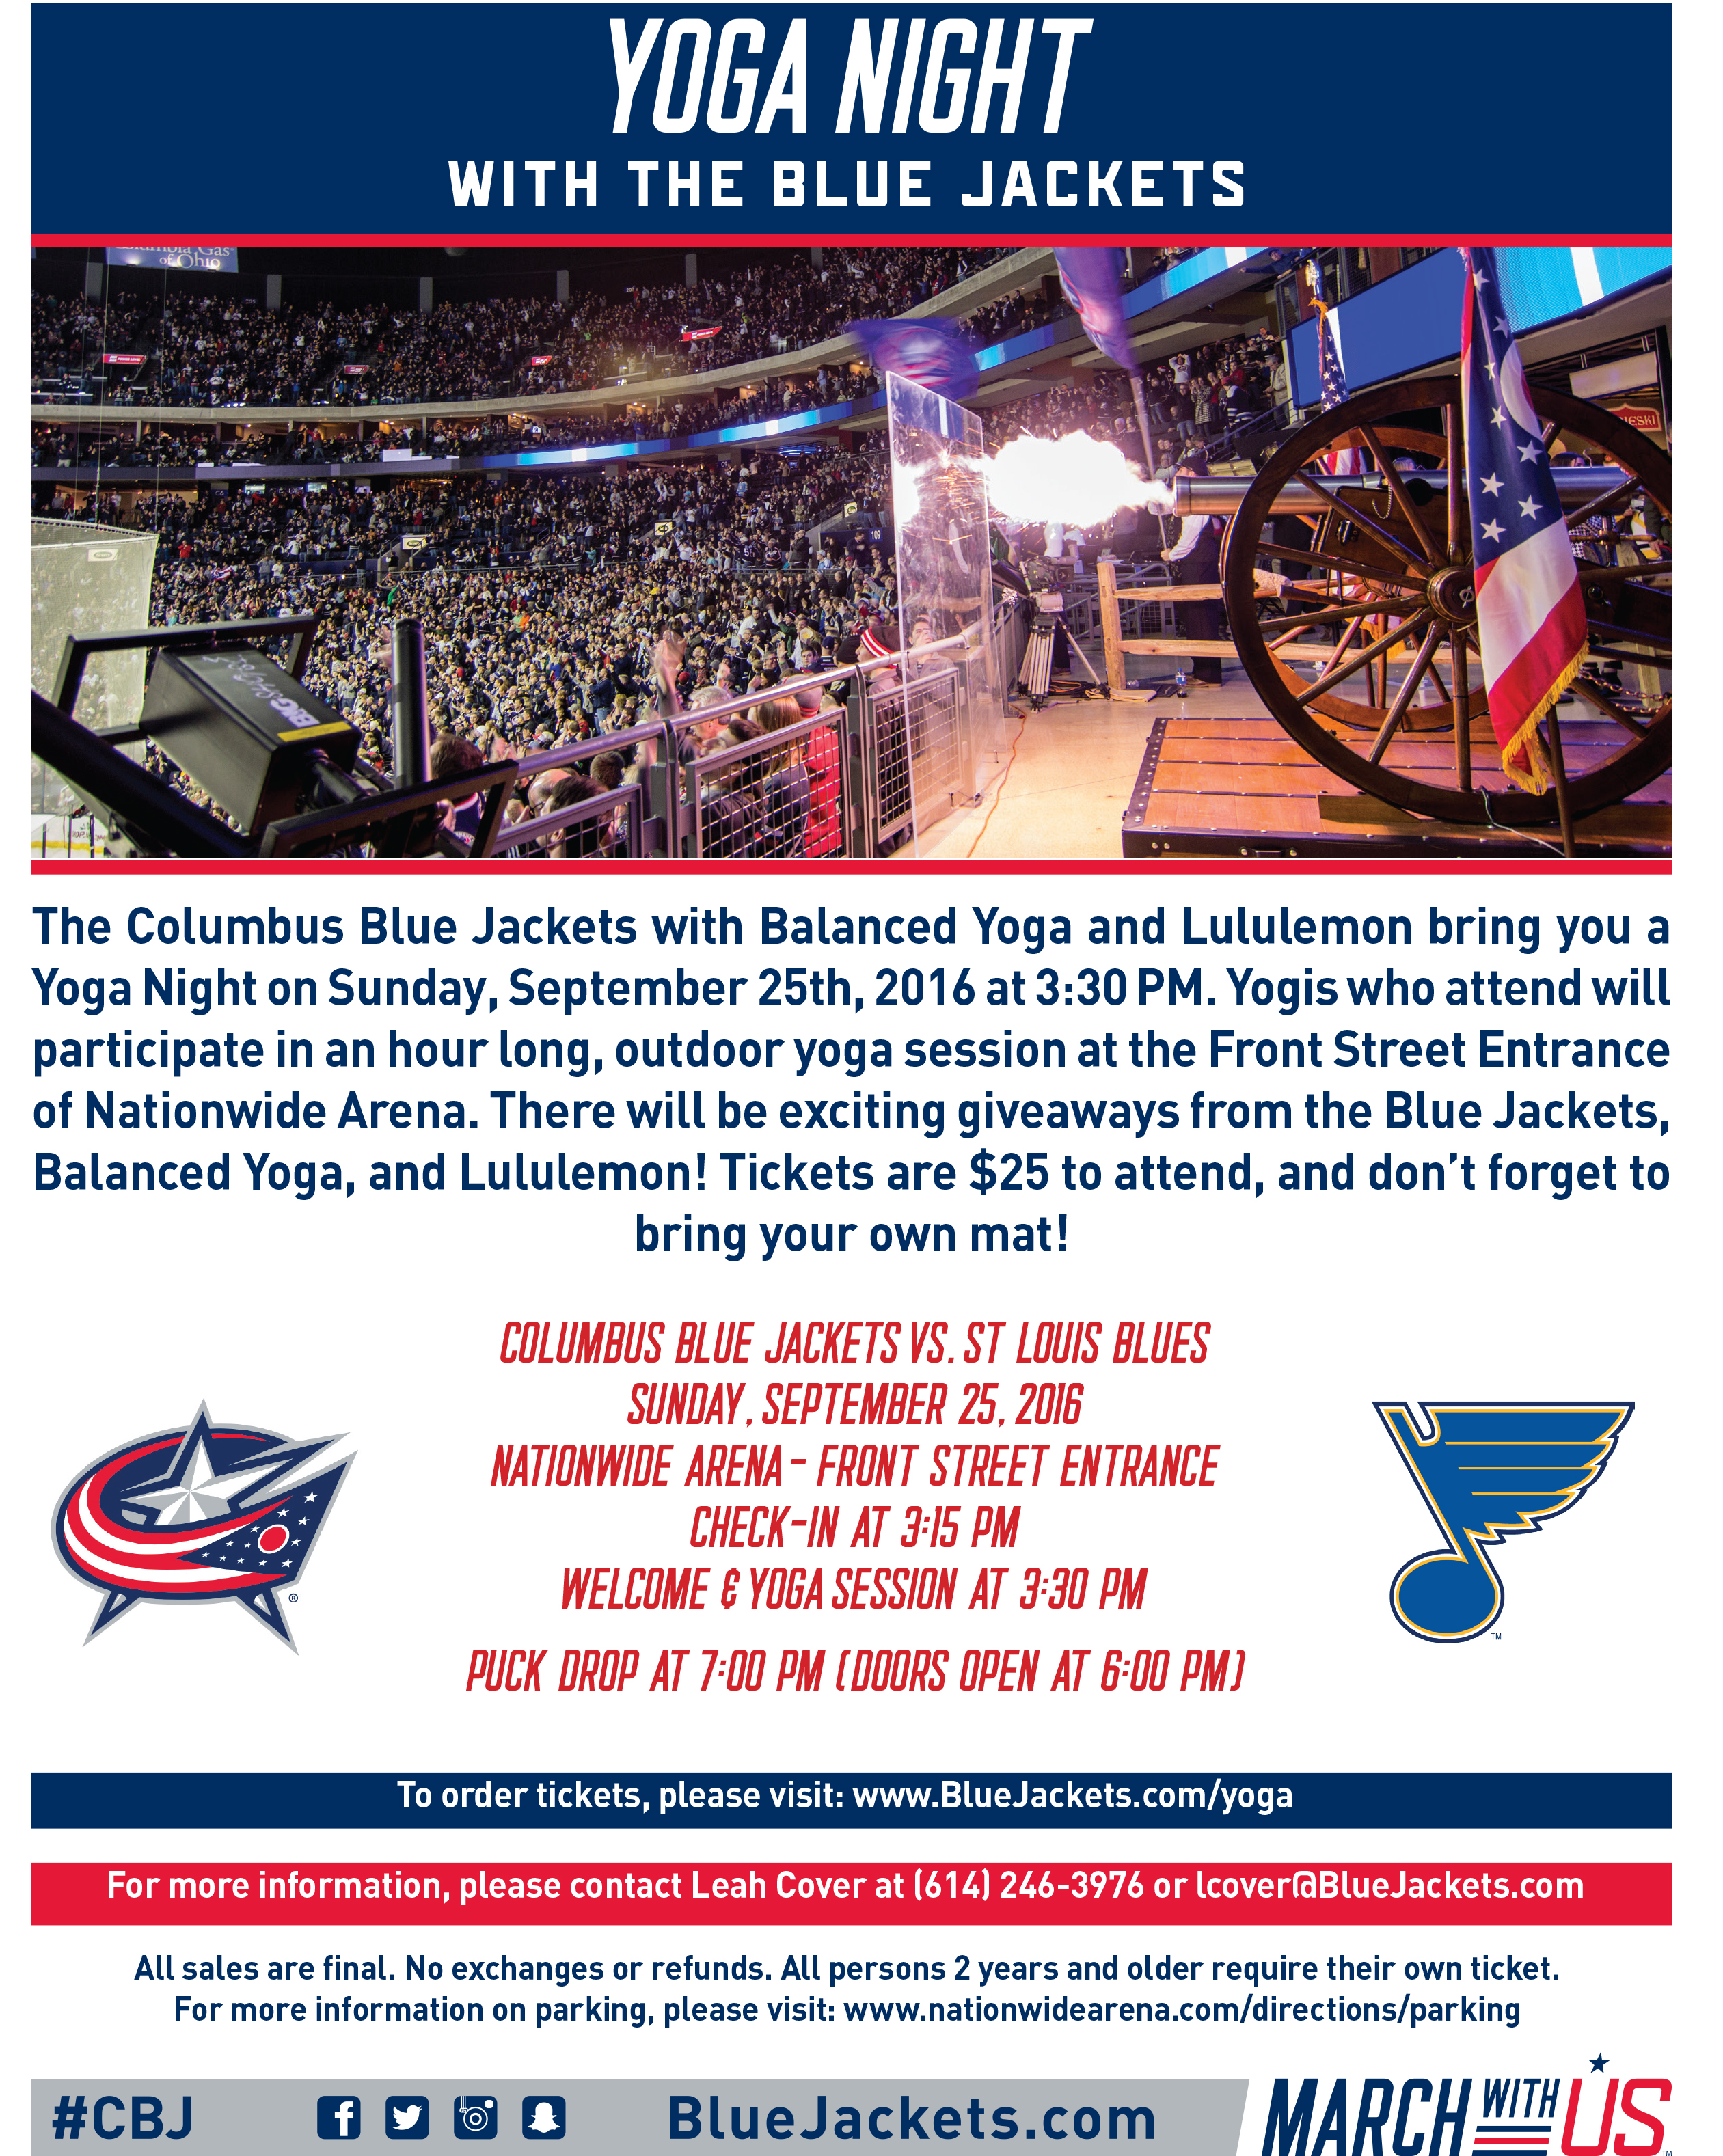 Yoga with the Blue Jackets, 3:30pm | Columbus Ohio Events | Arena ...